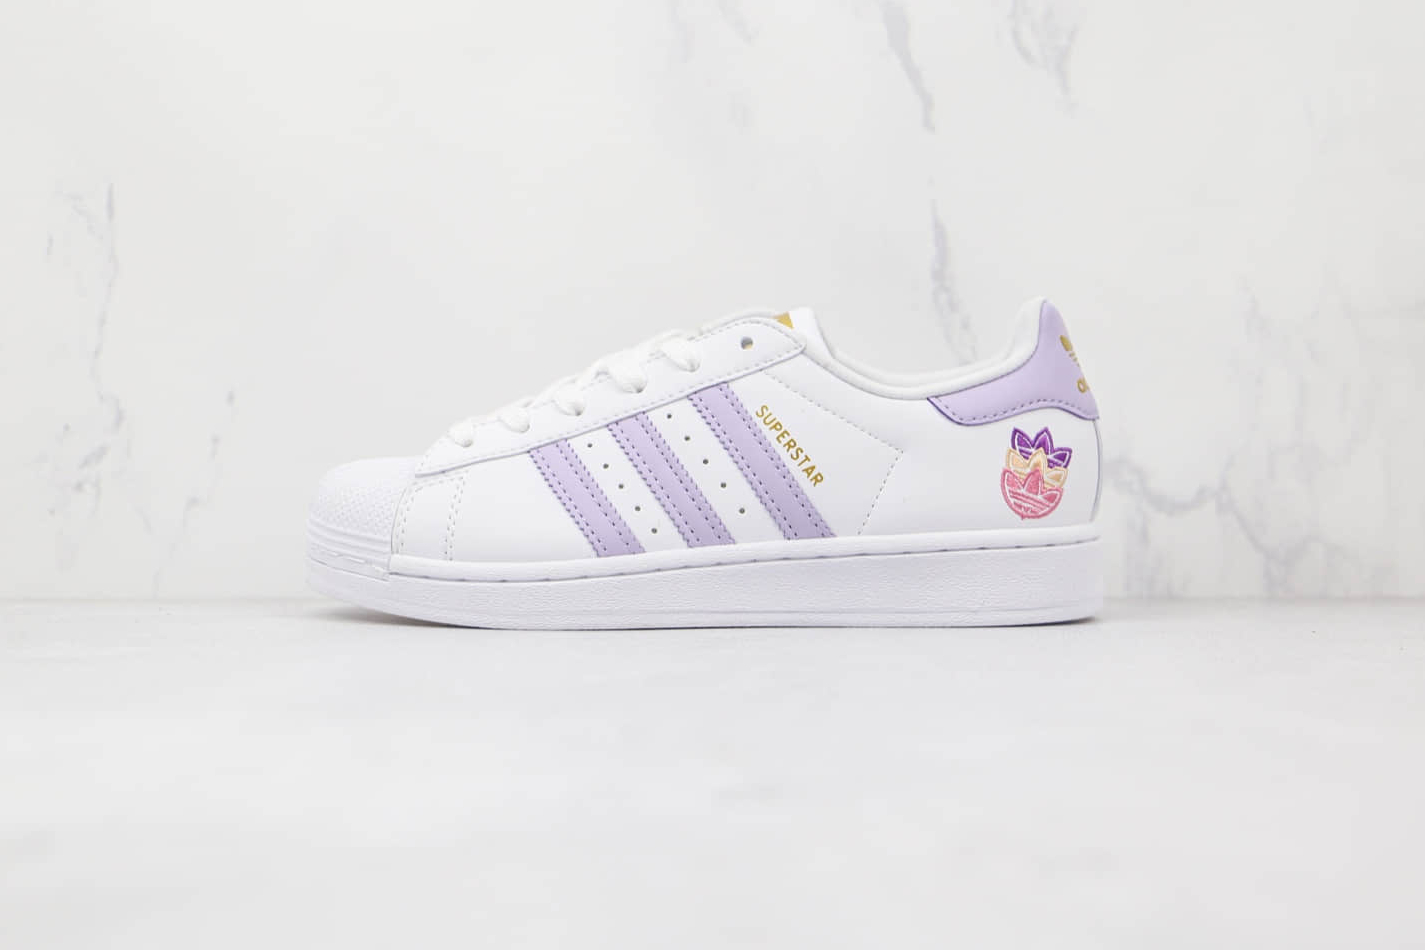 Adidas Superstar White Purple Tint Sneakers - GZ8143 | Limited Edition